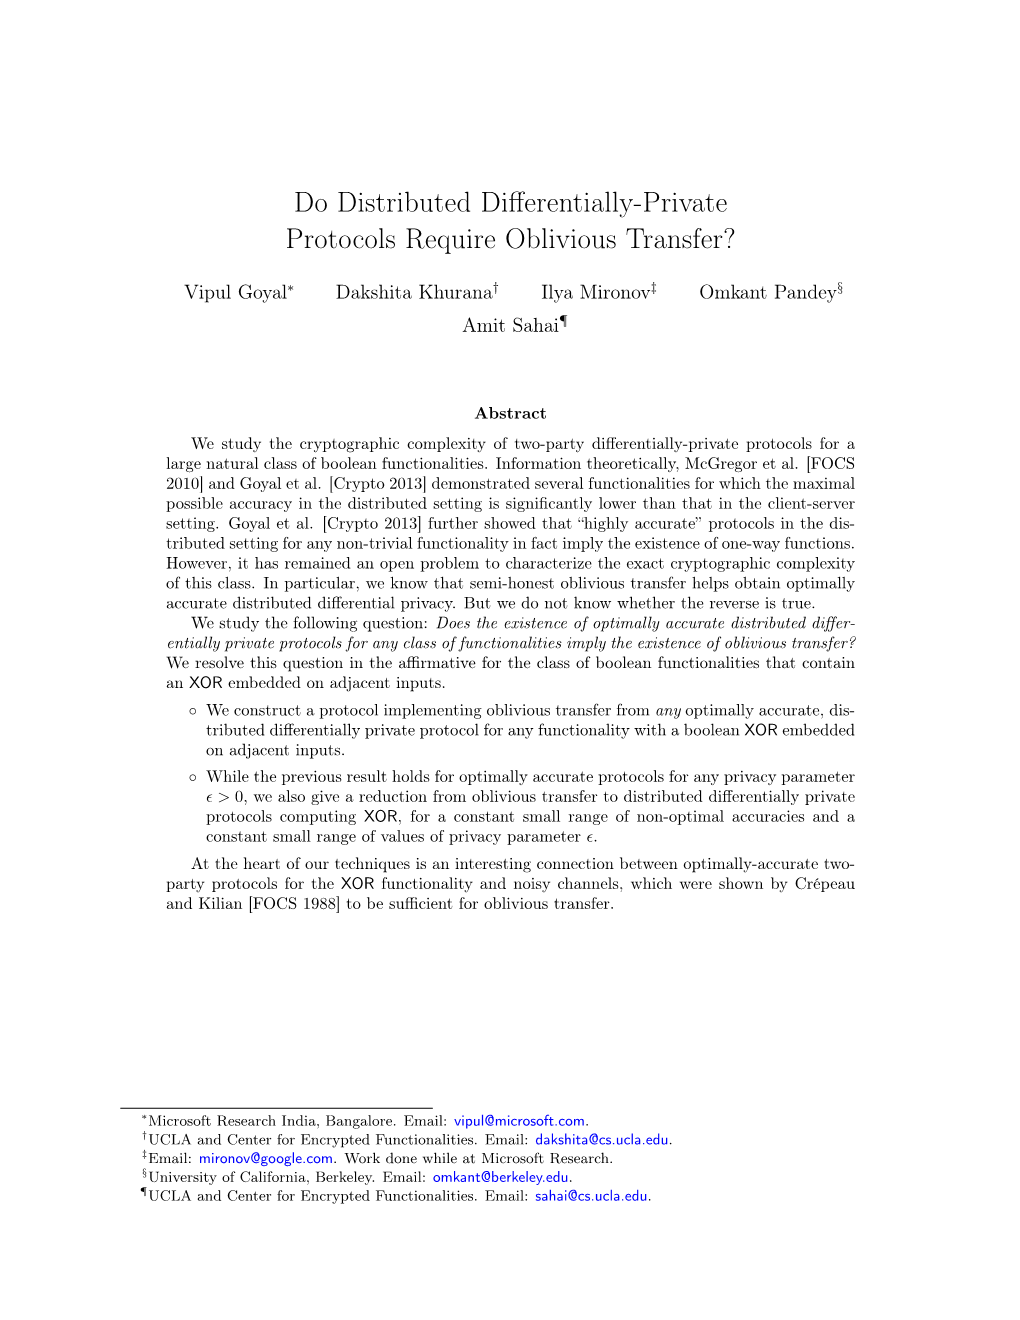 Do Distributed Differentially-Private Protocols Require Oblivious